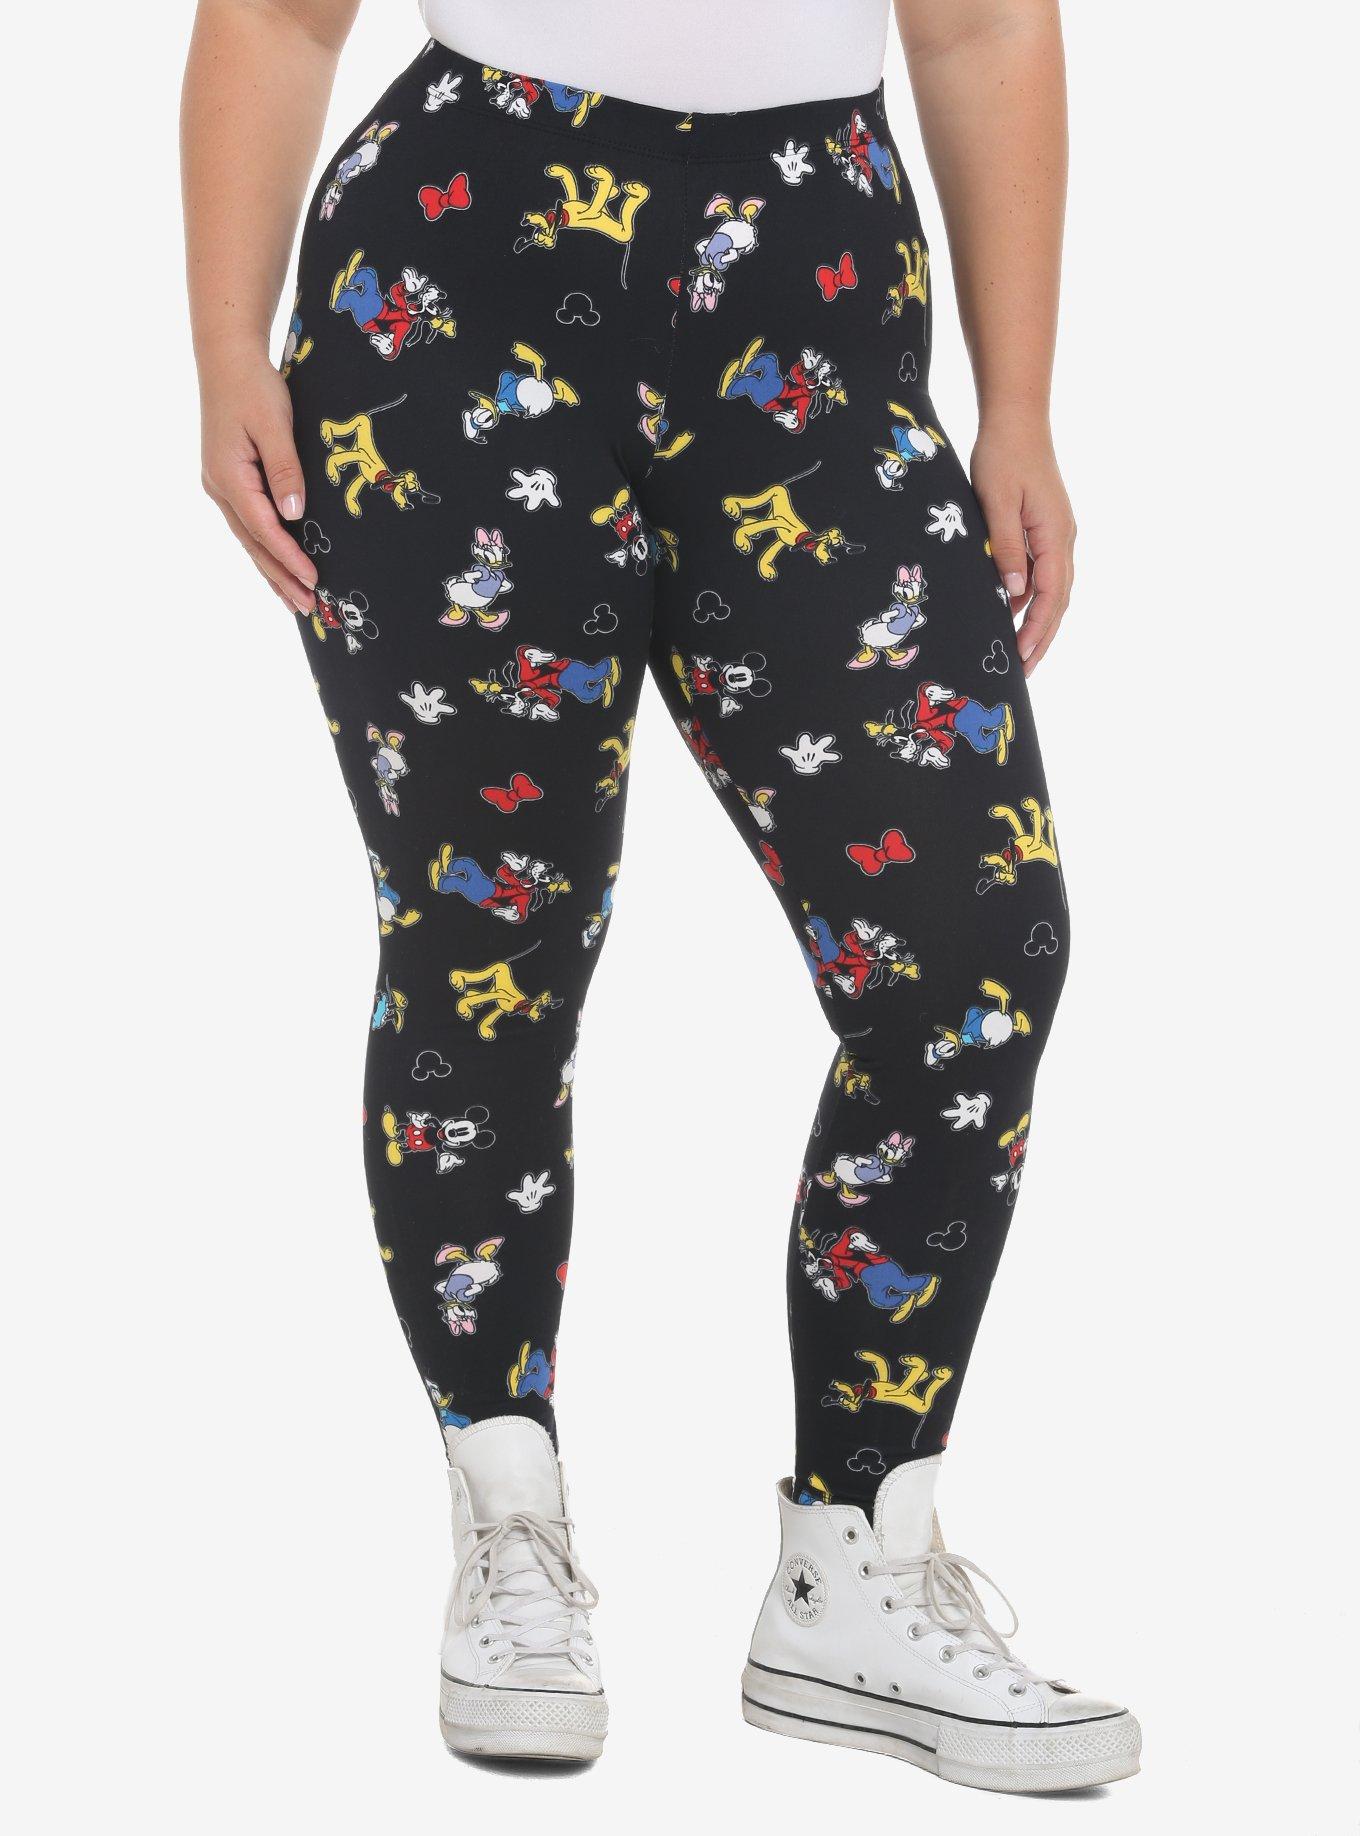 The Snazziest Character Leggings Just Sprinted into Disney Springs